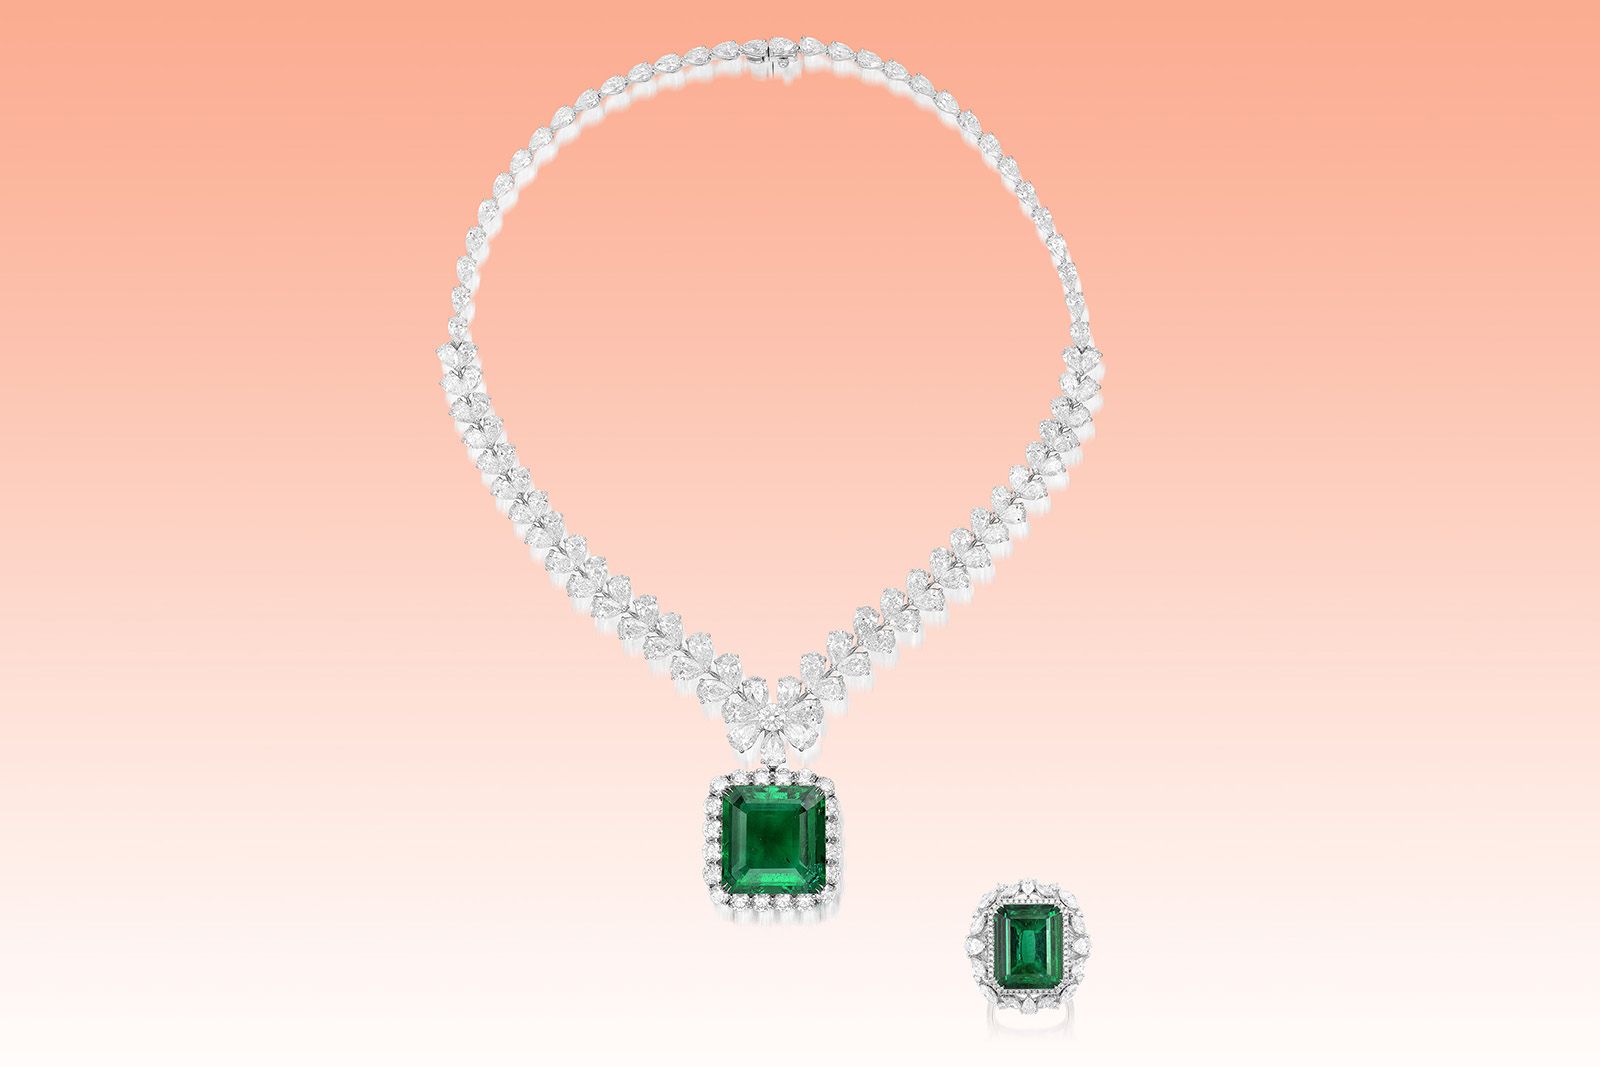 This Zambian emerald and diamond necklace and ring will be sold by Phillips Hong Kong via an online auction in November 2021 titled “Treasures from Zambia: An Exceptional Emerald Collection”